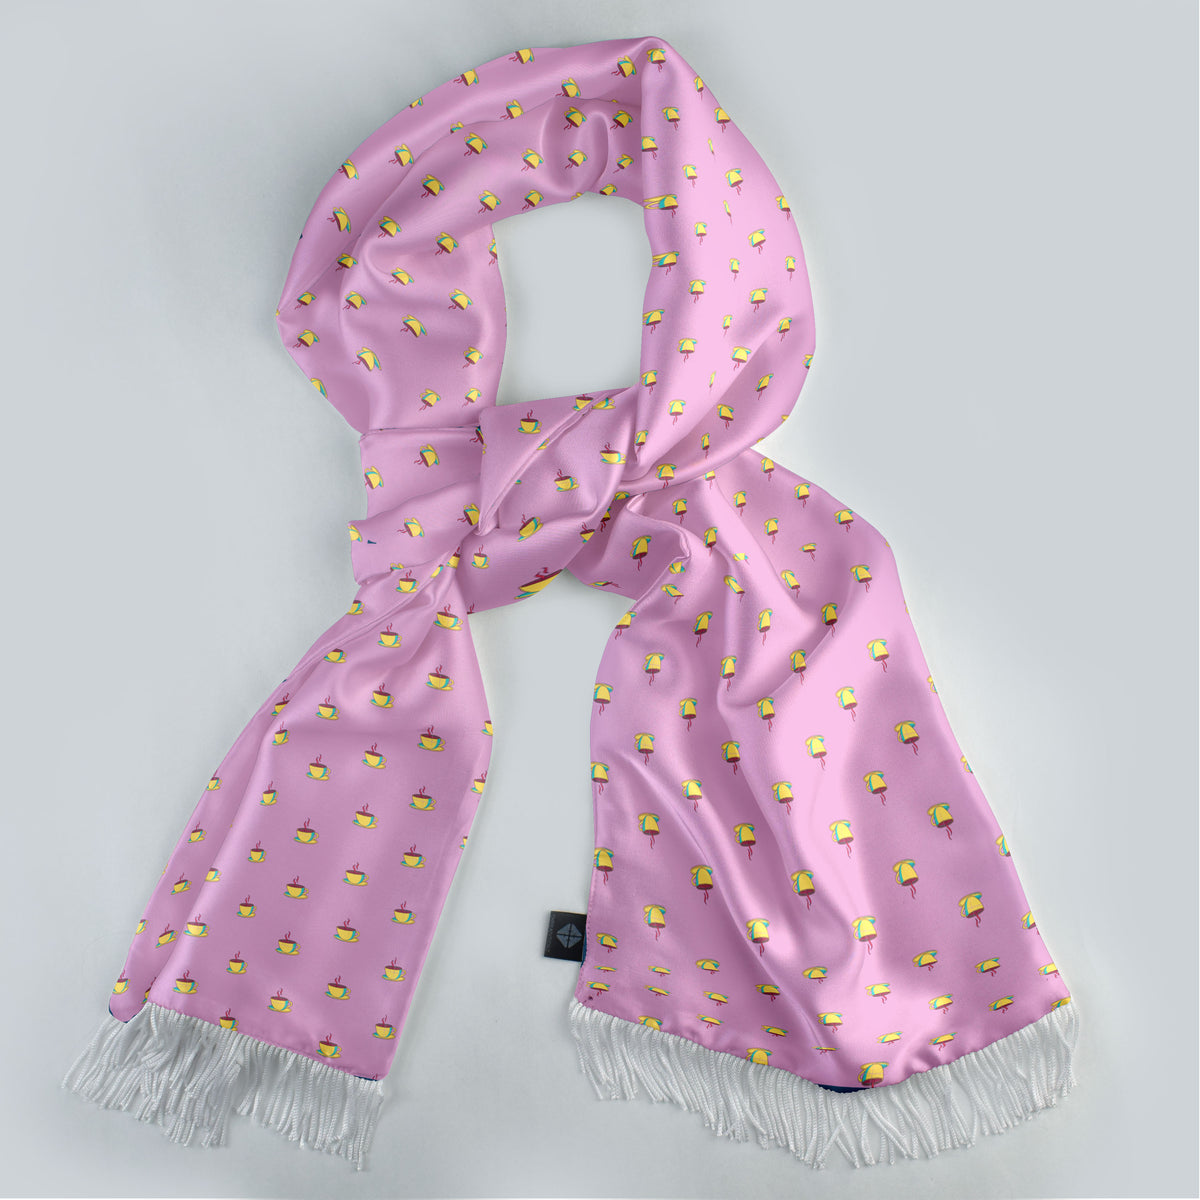 THE PINK TEA PARTY SILK SCARF